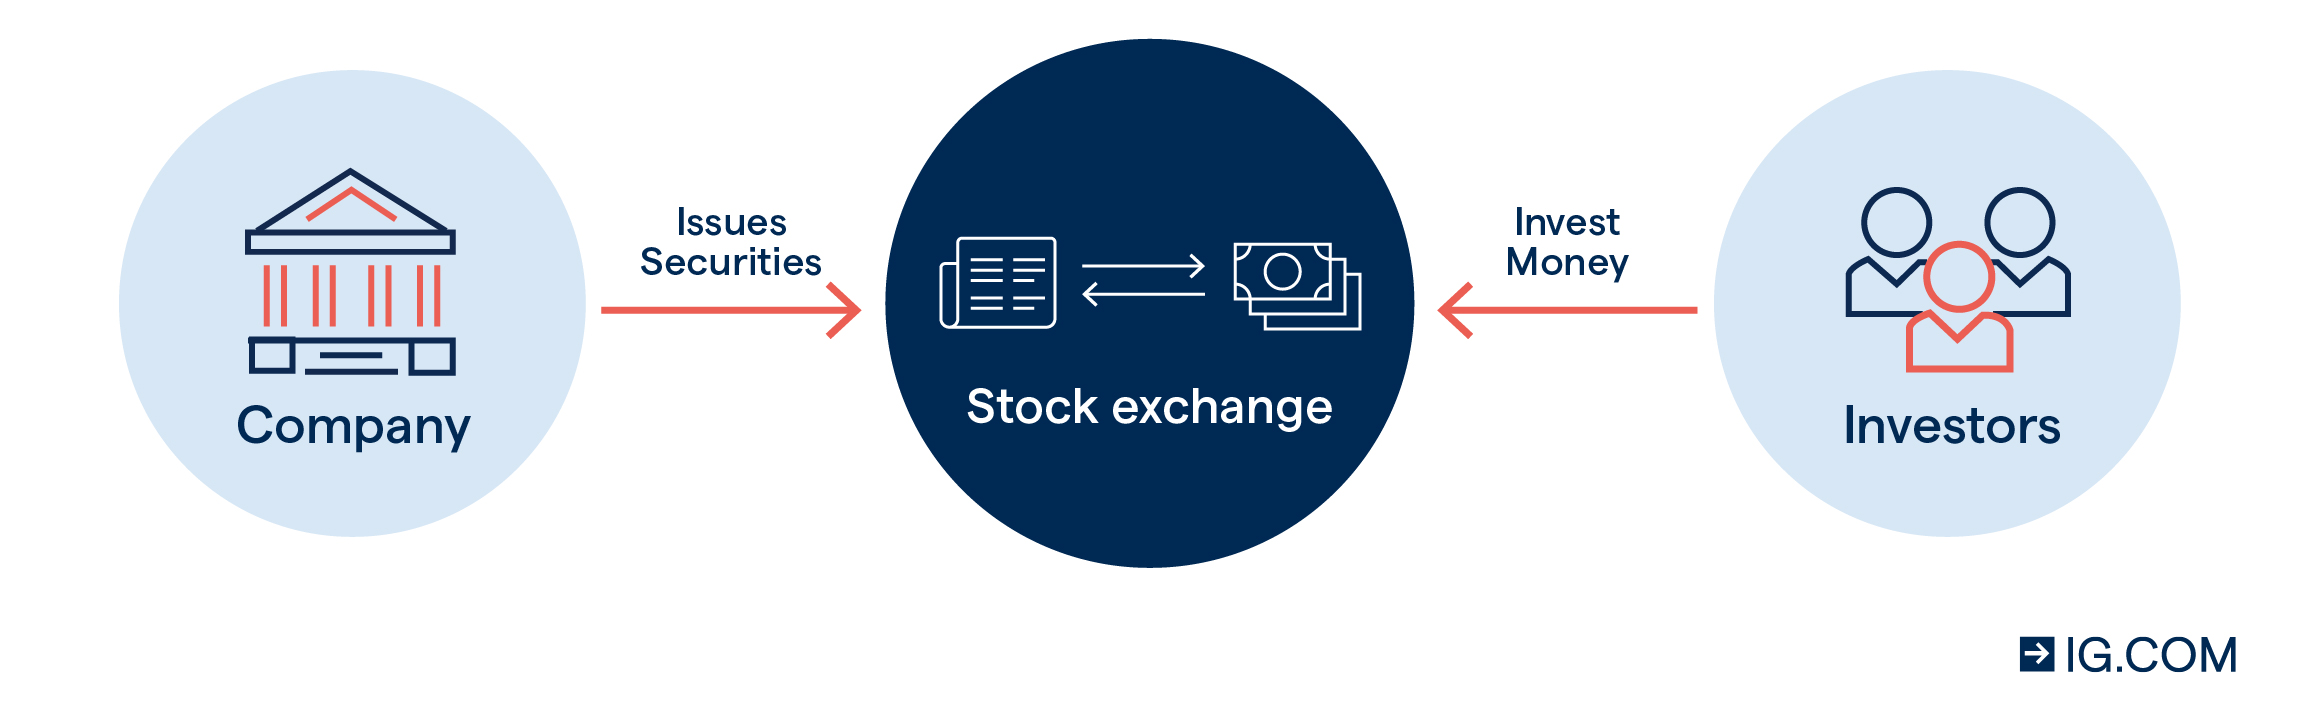 the transaction between investors seeking ownership of shares and the company issuing its securities in the stock exchange